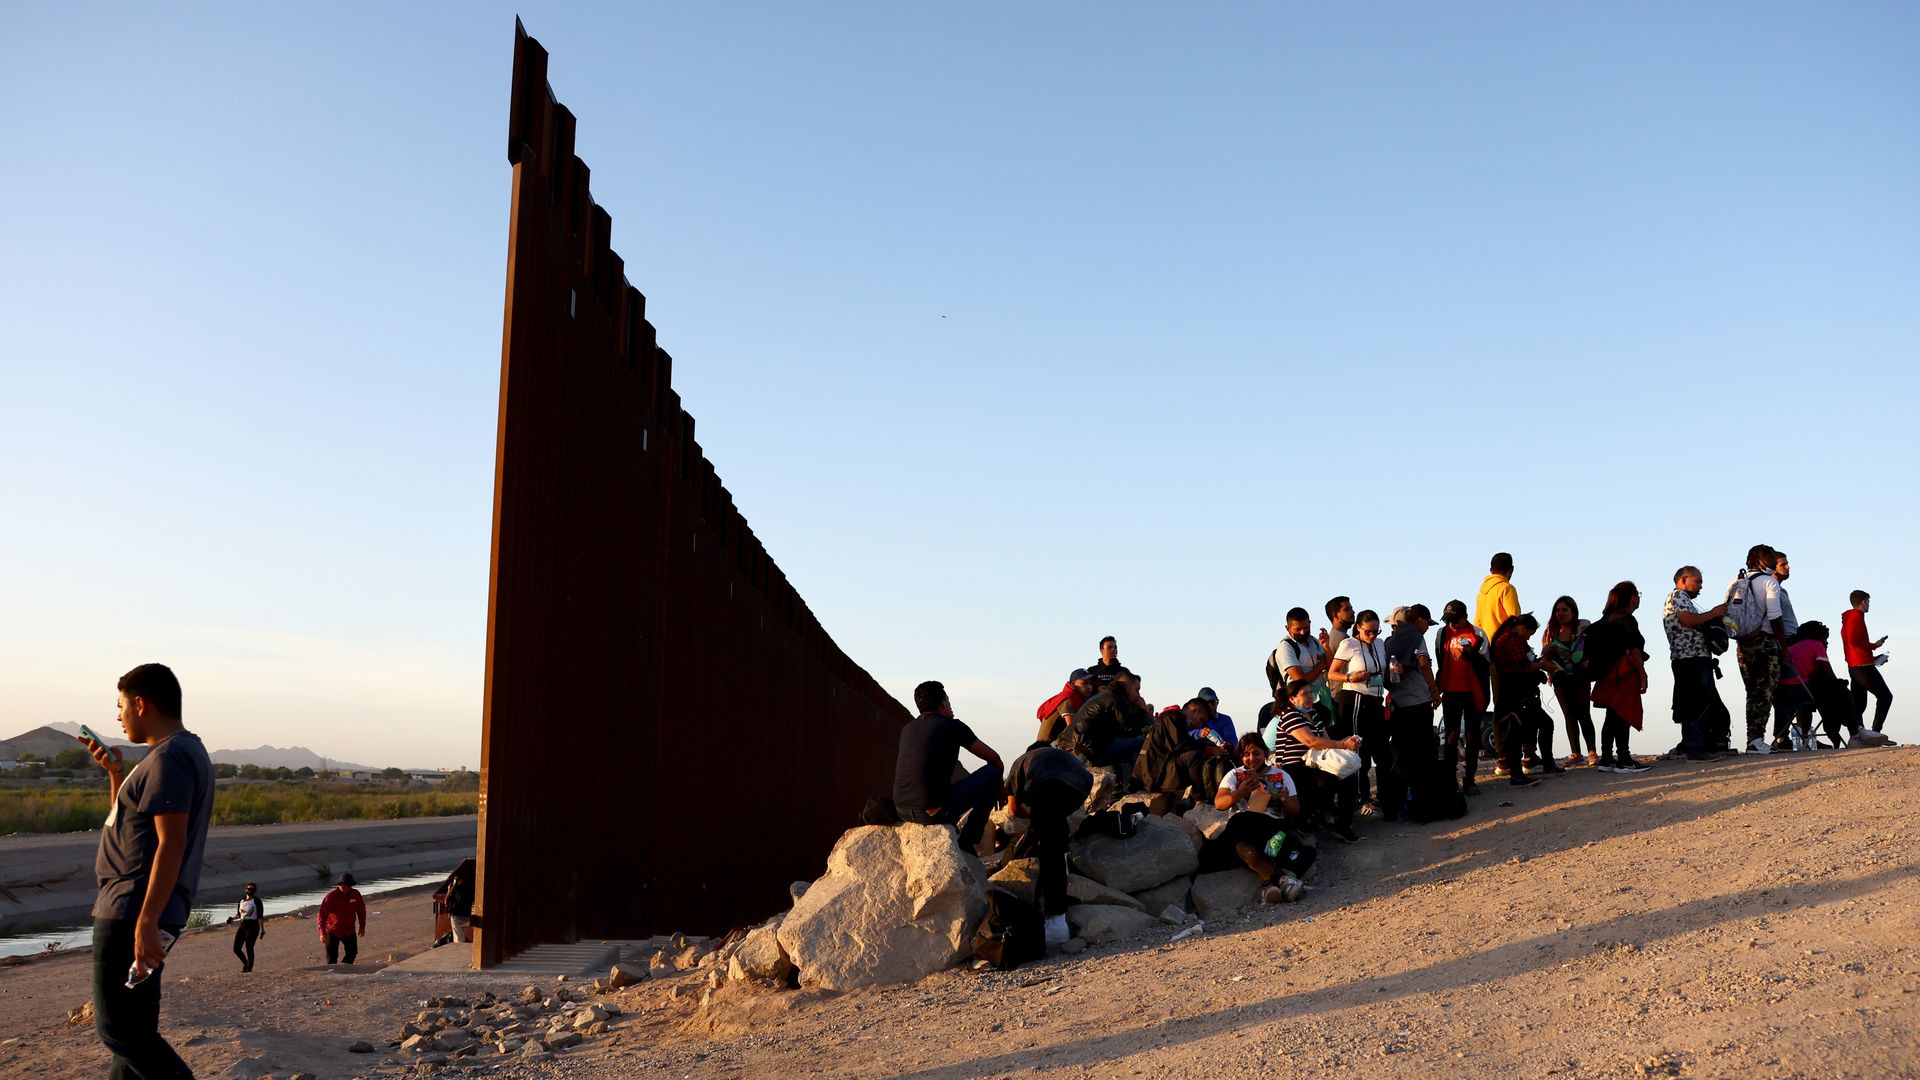  Immigrants wait to be processed by the U.S. Border Patrol after crossing through a gap in the U.S.-Mexico border barrier 